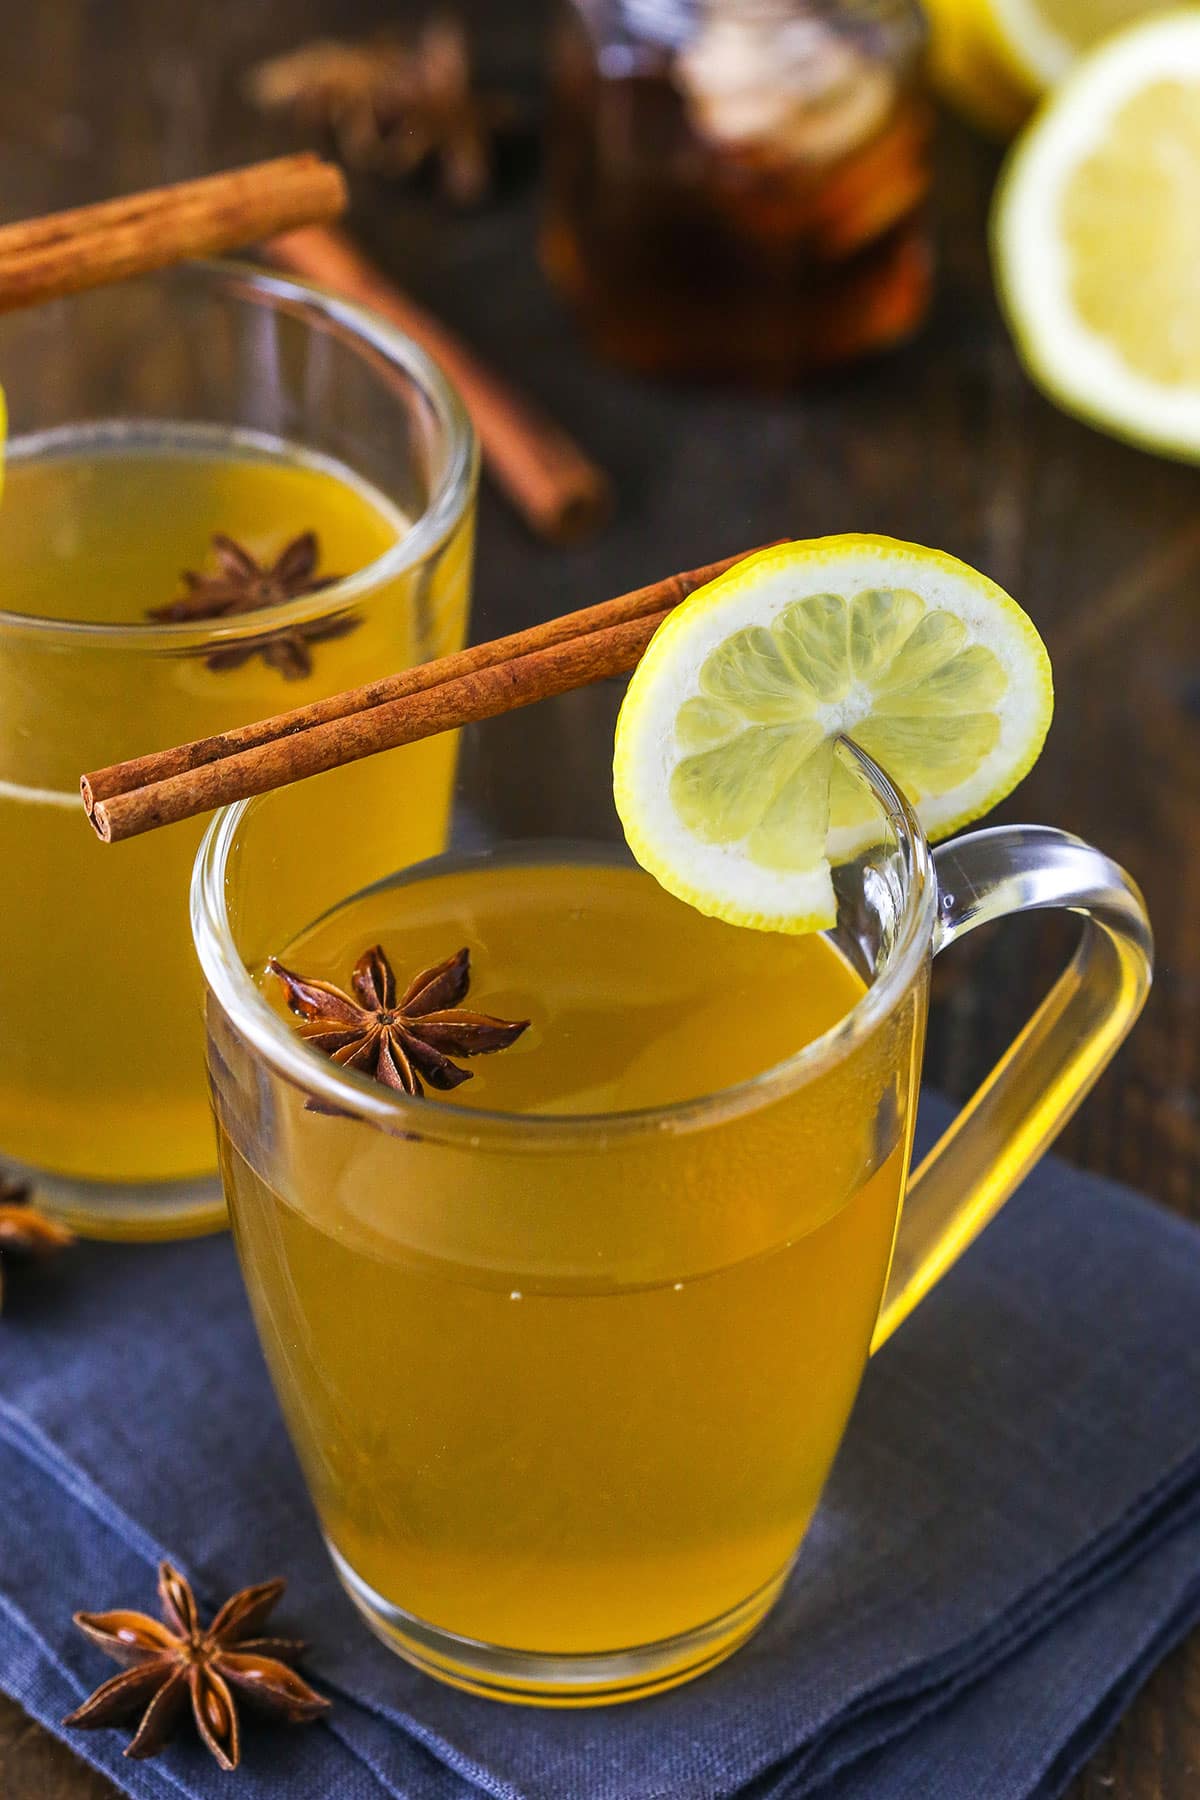 Best Hot Toddy for Sore Throat, Cough or Cold - Cocktail Contessa